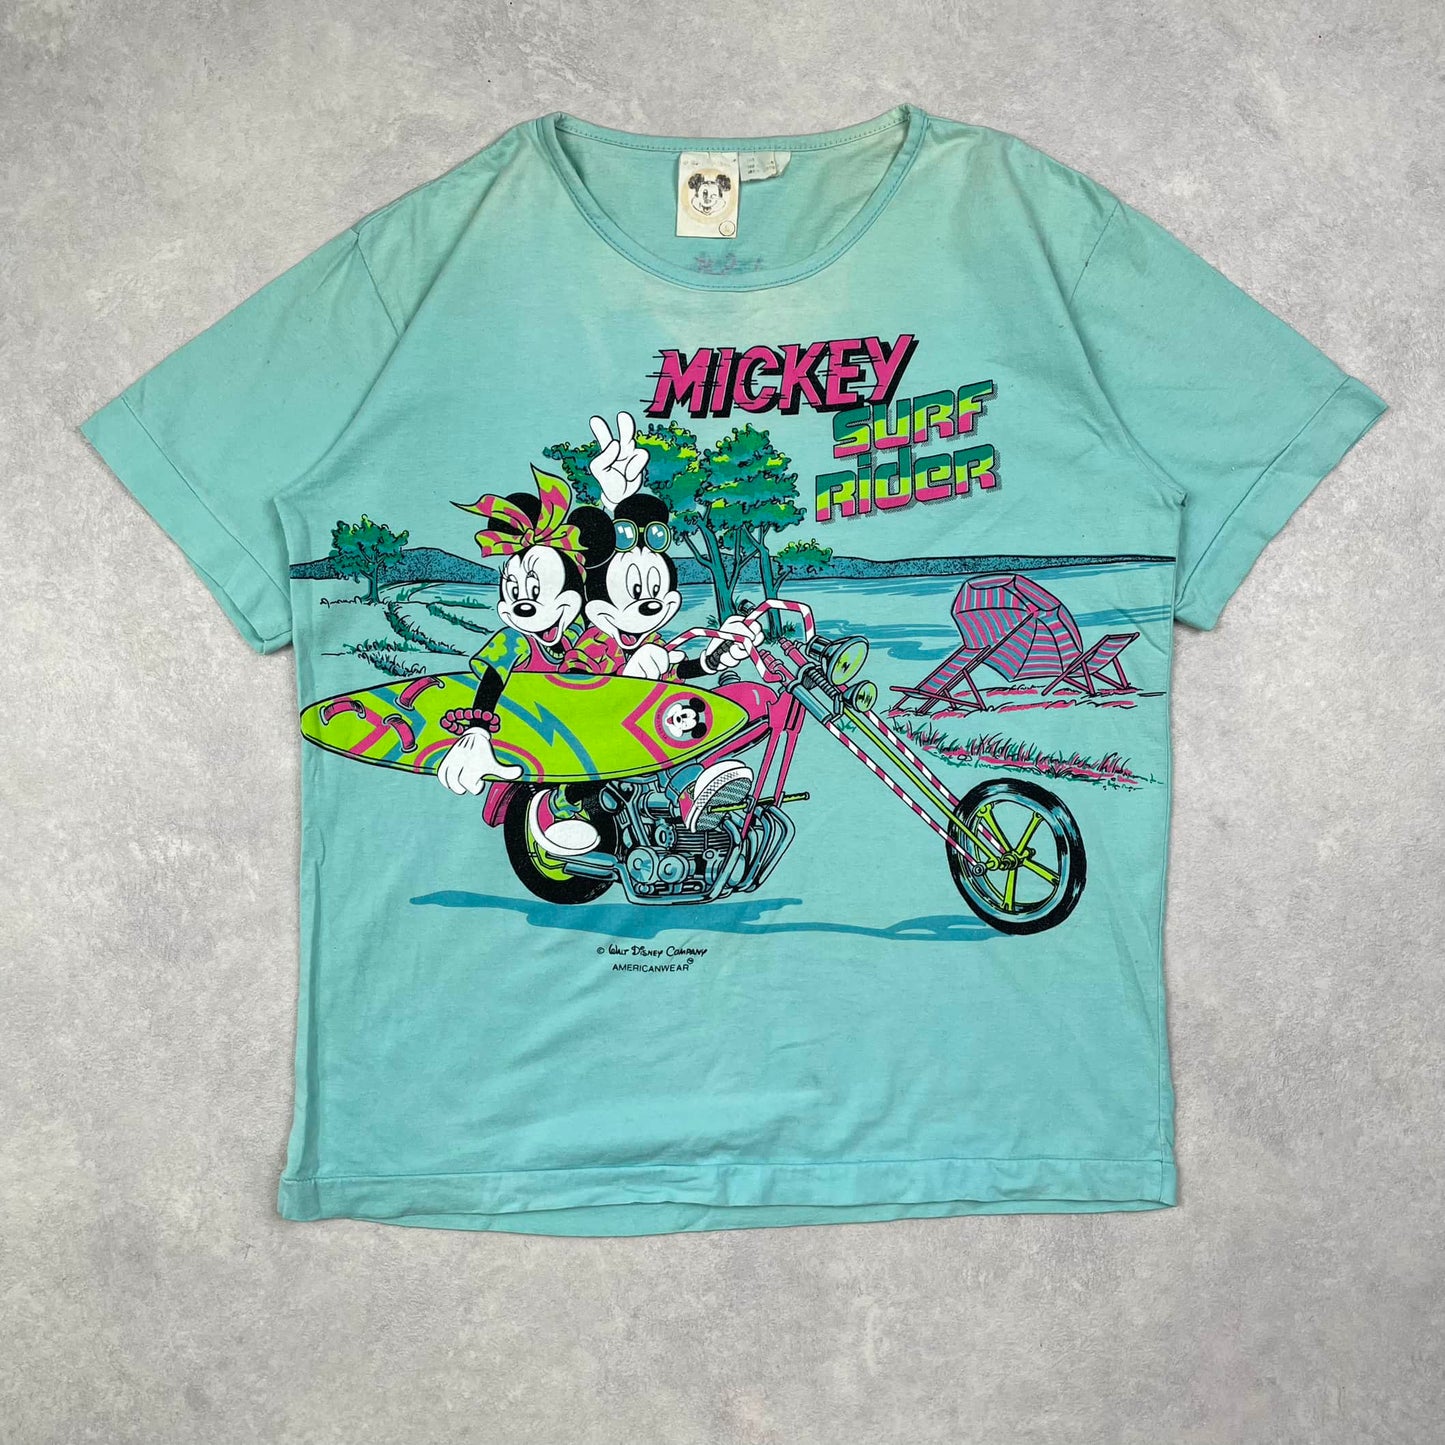 Vintage Single Stitch T-Shirt Disney “Mickey Surf Riders” Made in USA